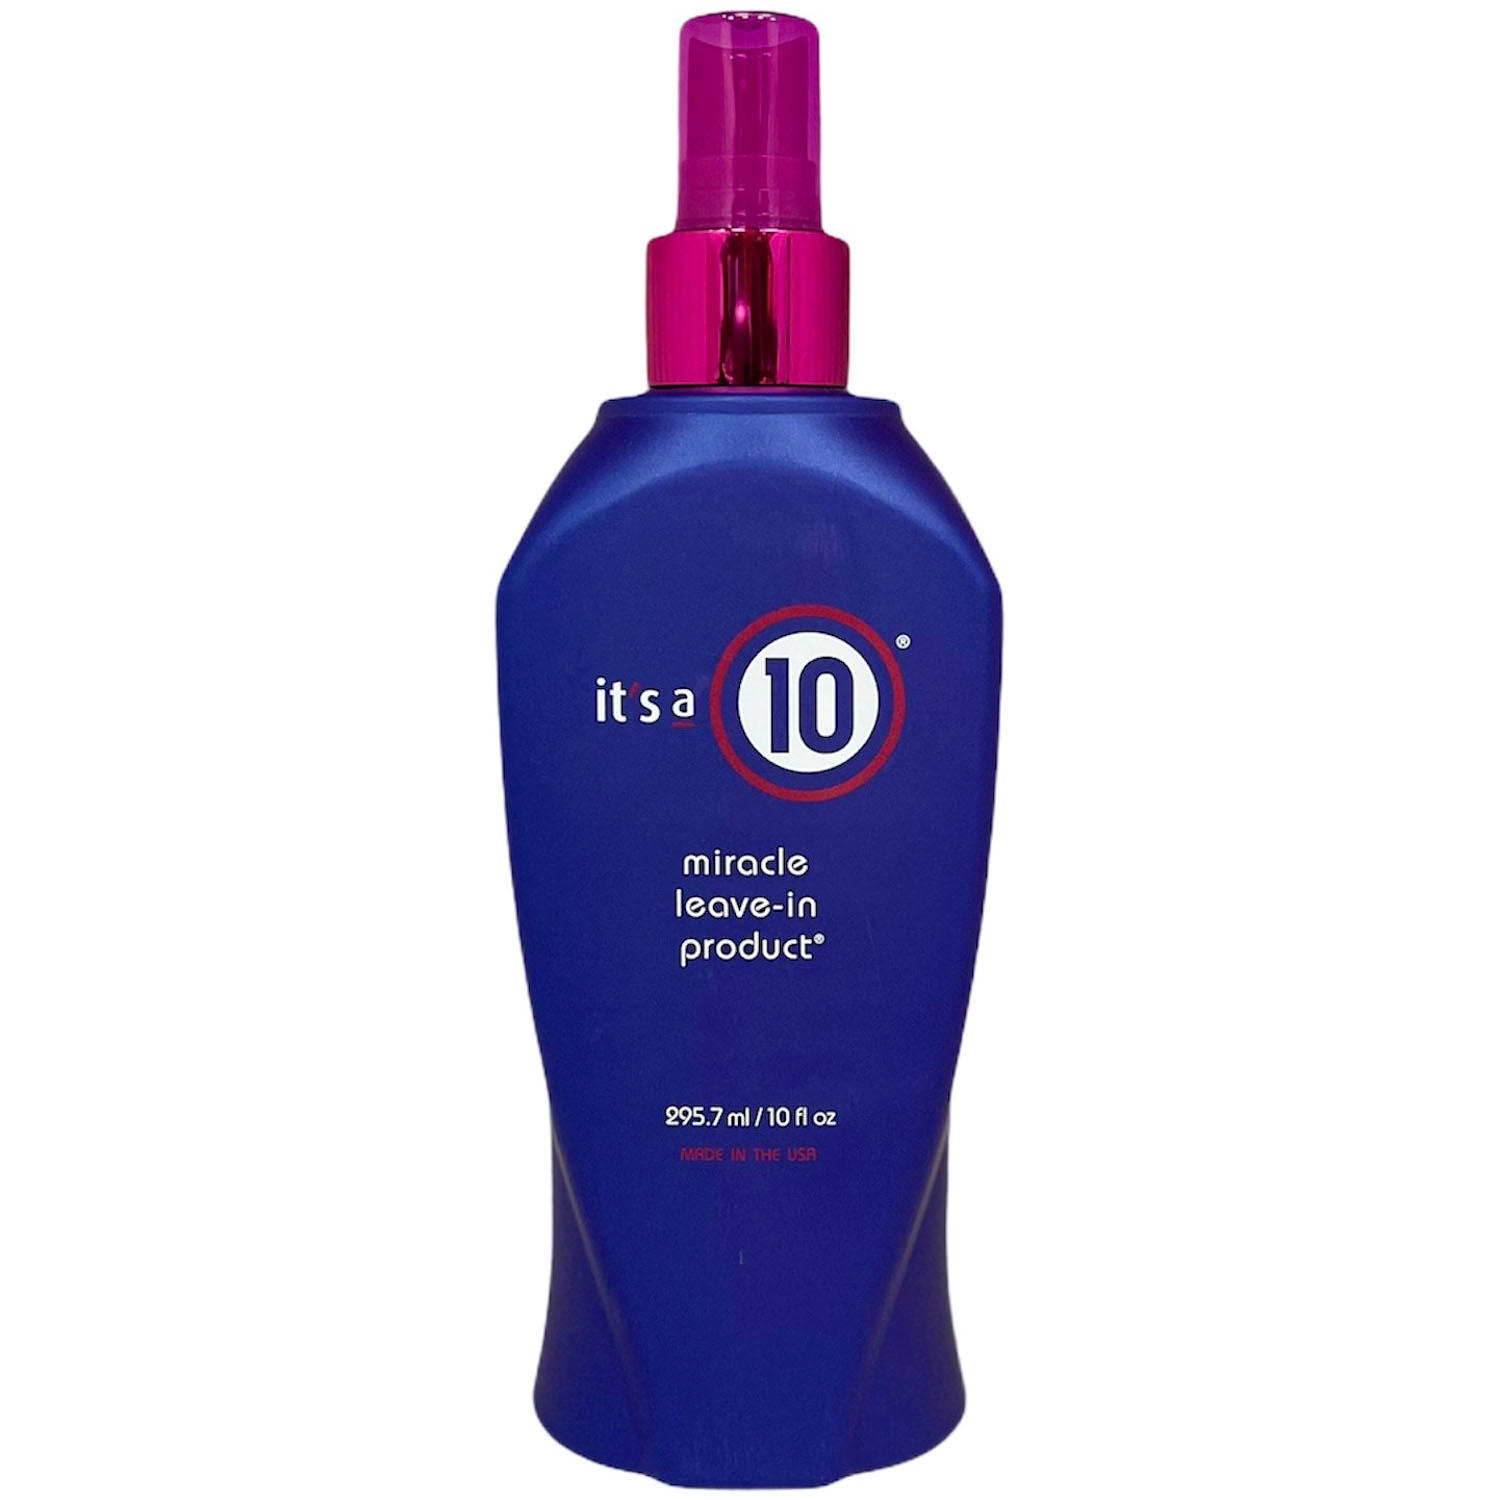 It's A 10 Miracle Leave-In Conditioner Spray